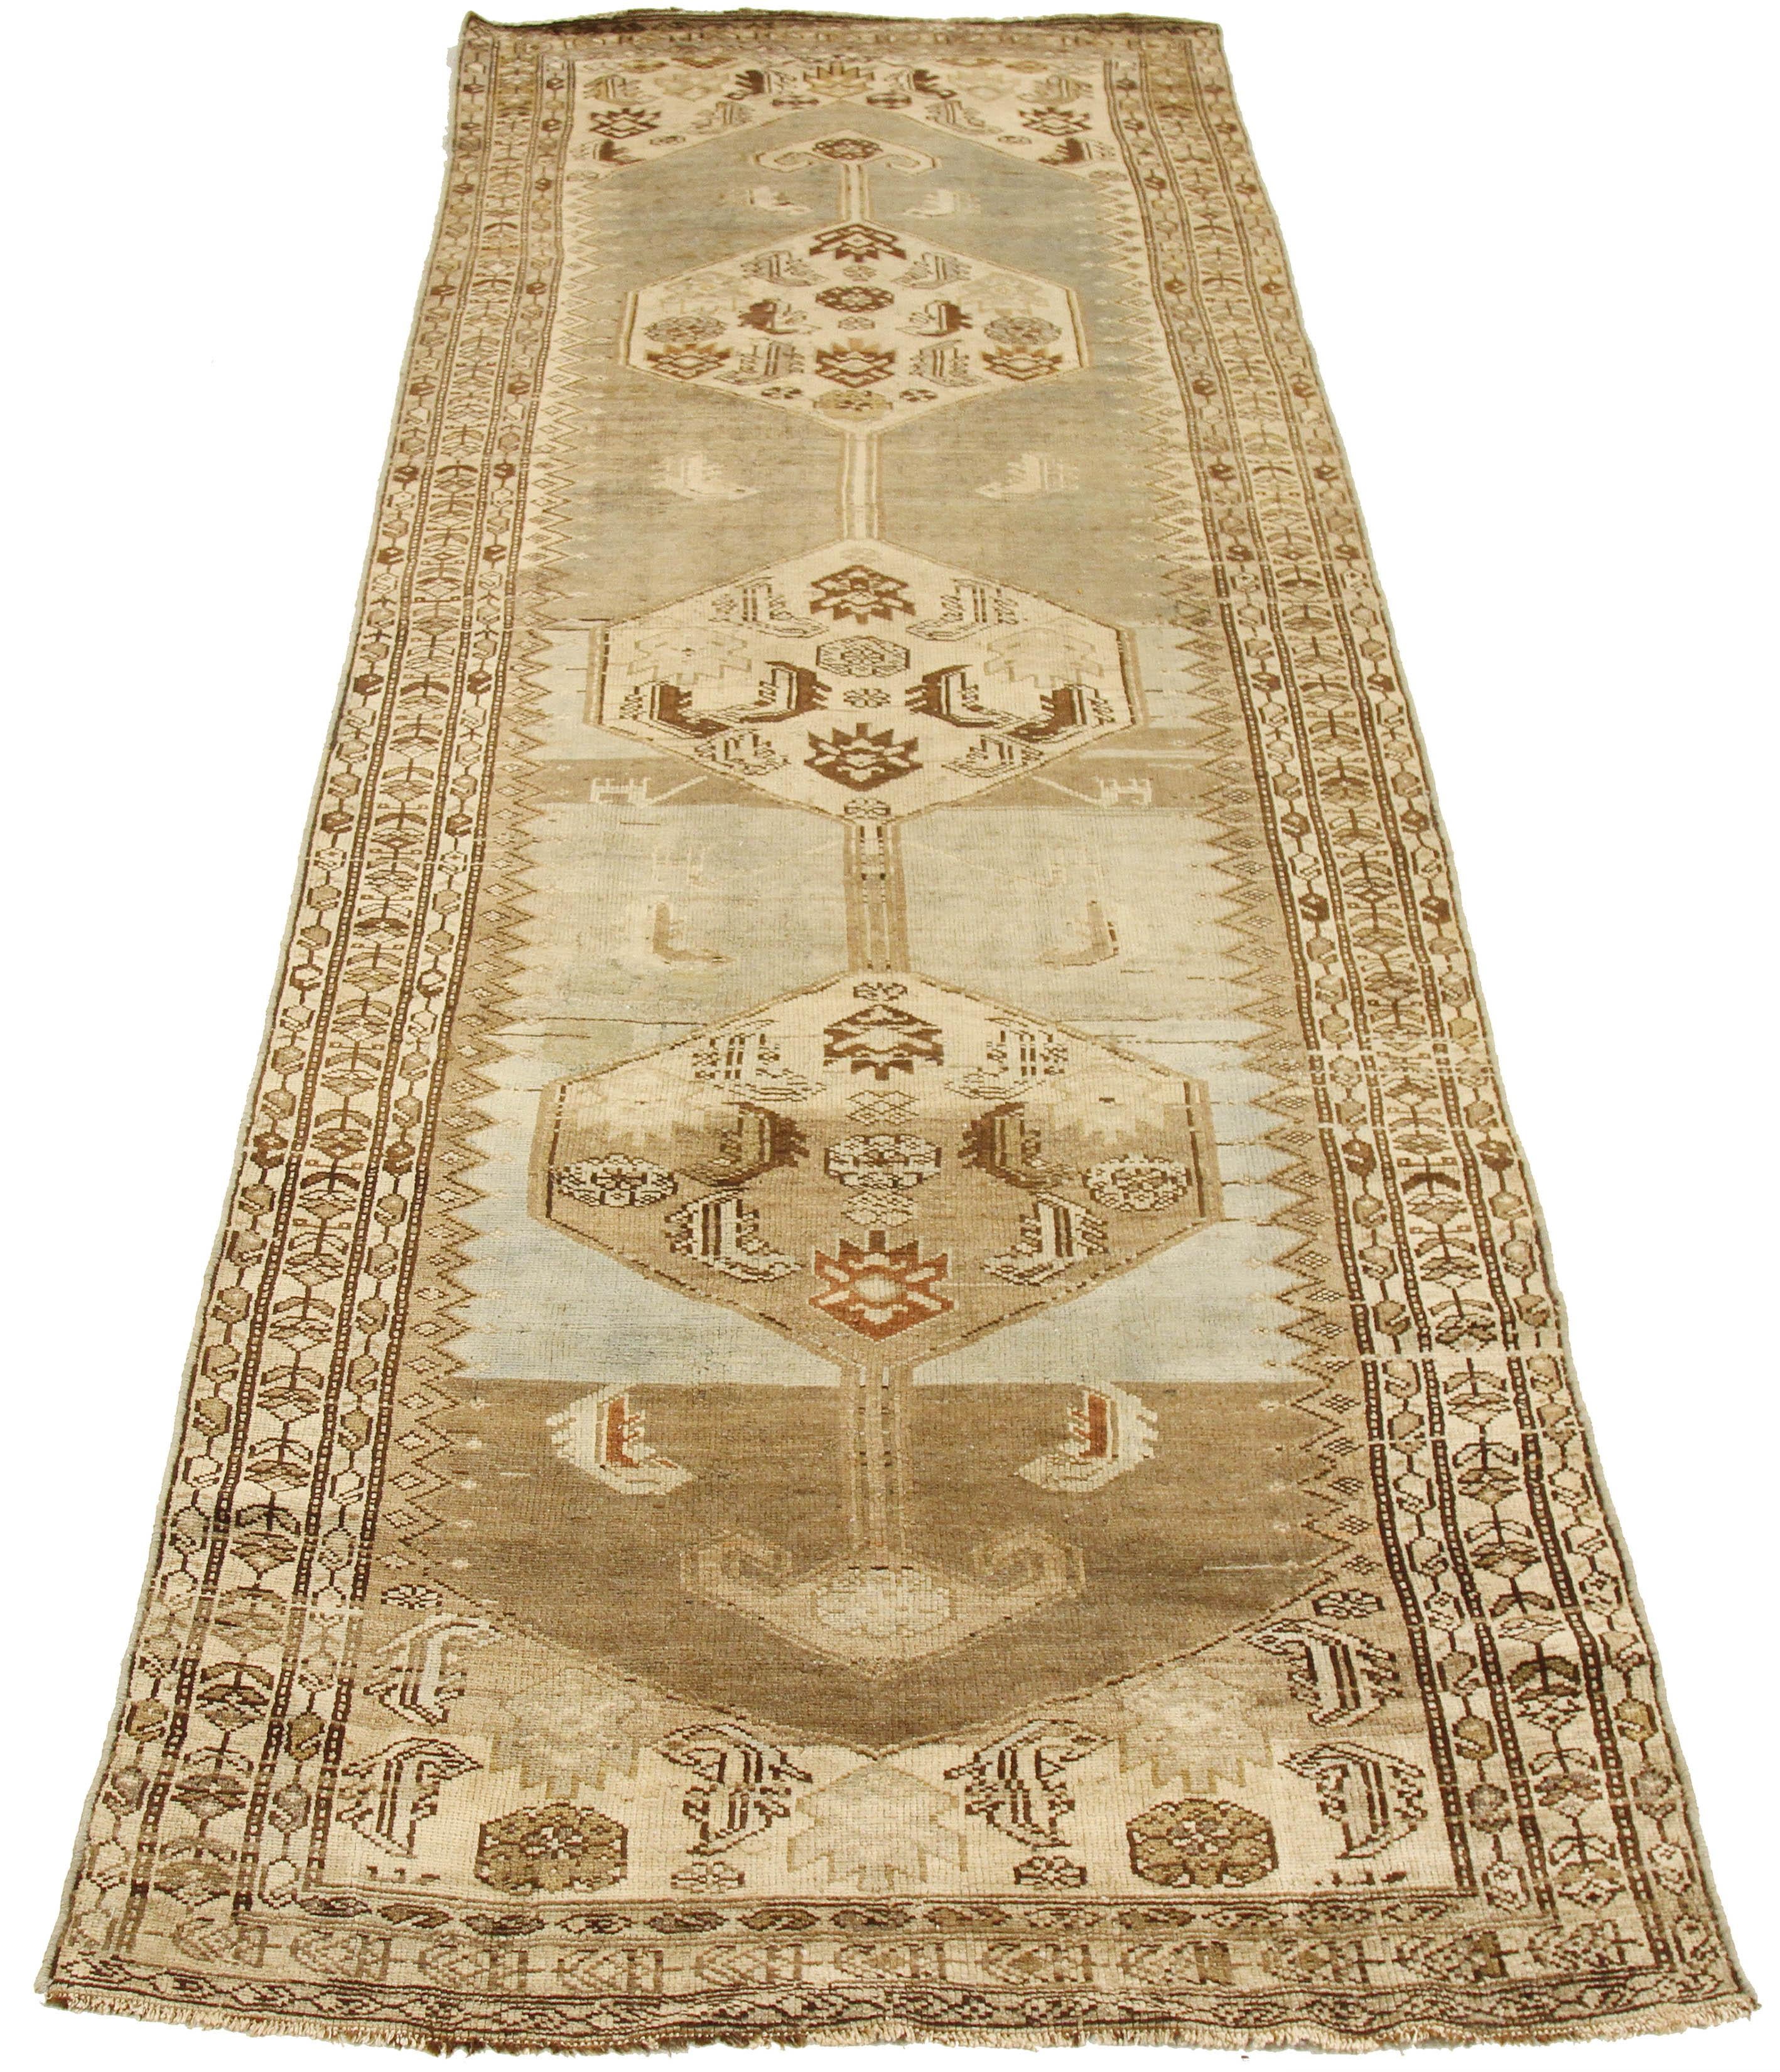 Antique Azerbaijan runner rug handwoven from the finest sheep’s wool and colored with all-natural vegetable dyes that are safe for humans and pets. It’s a traditional Azerbaijani design featuring mixed floral and geometric details over an ivory